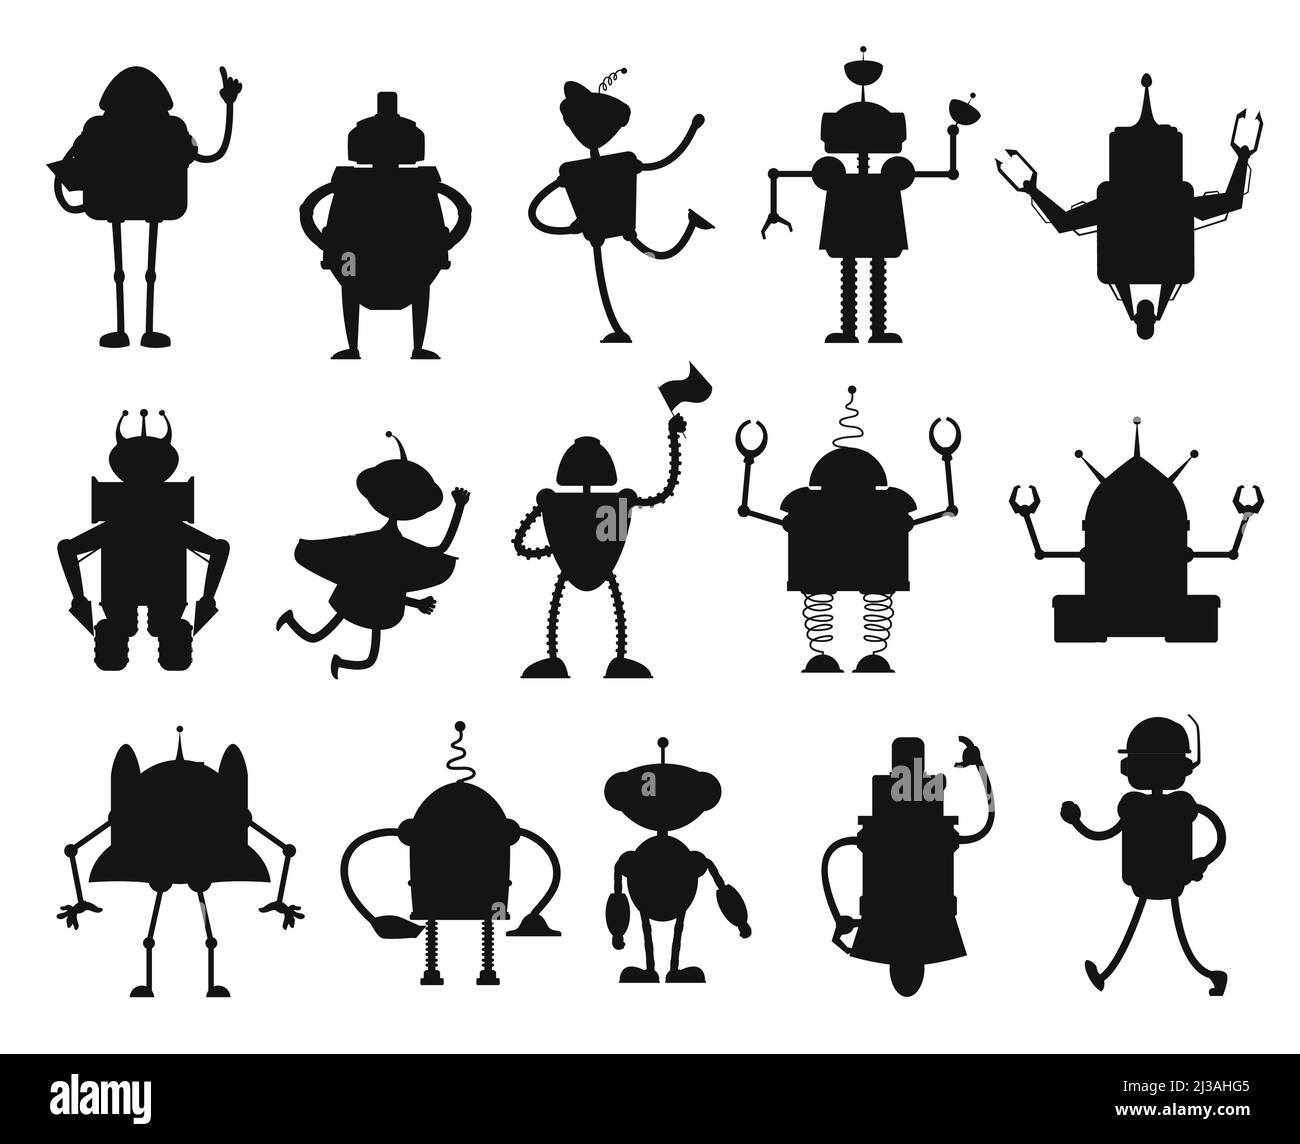 Robots and droids silhouettes of artificial intelligence toys. Isolated vector black robots, bots, droids and cyborgs with antennas on heads, spring legs, wheels and manipulator arms, AI technologies Stock Vector